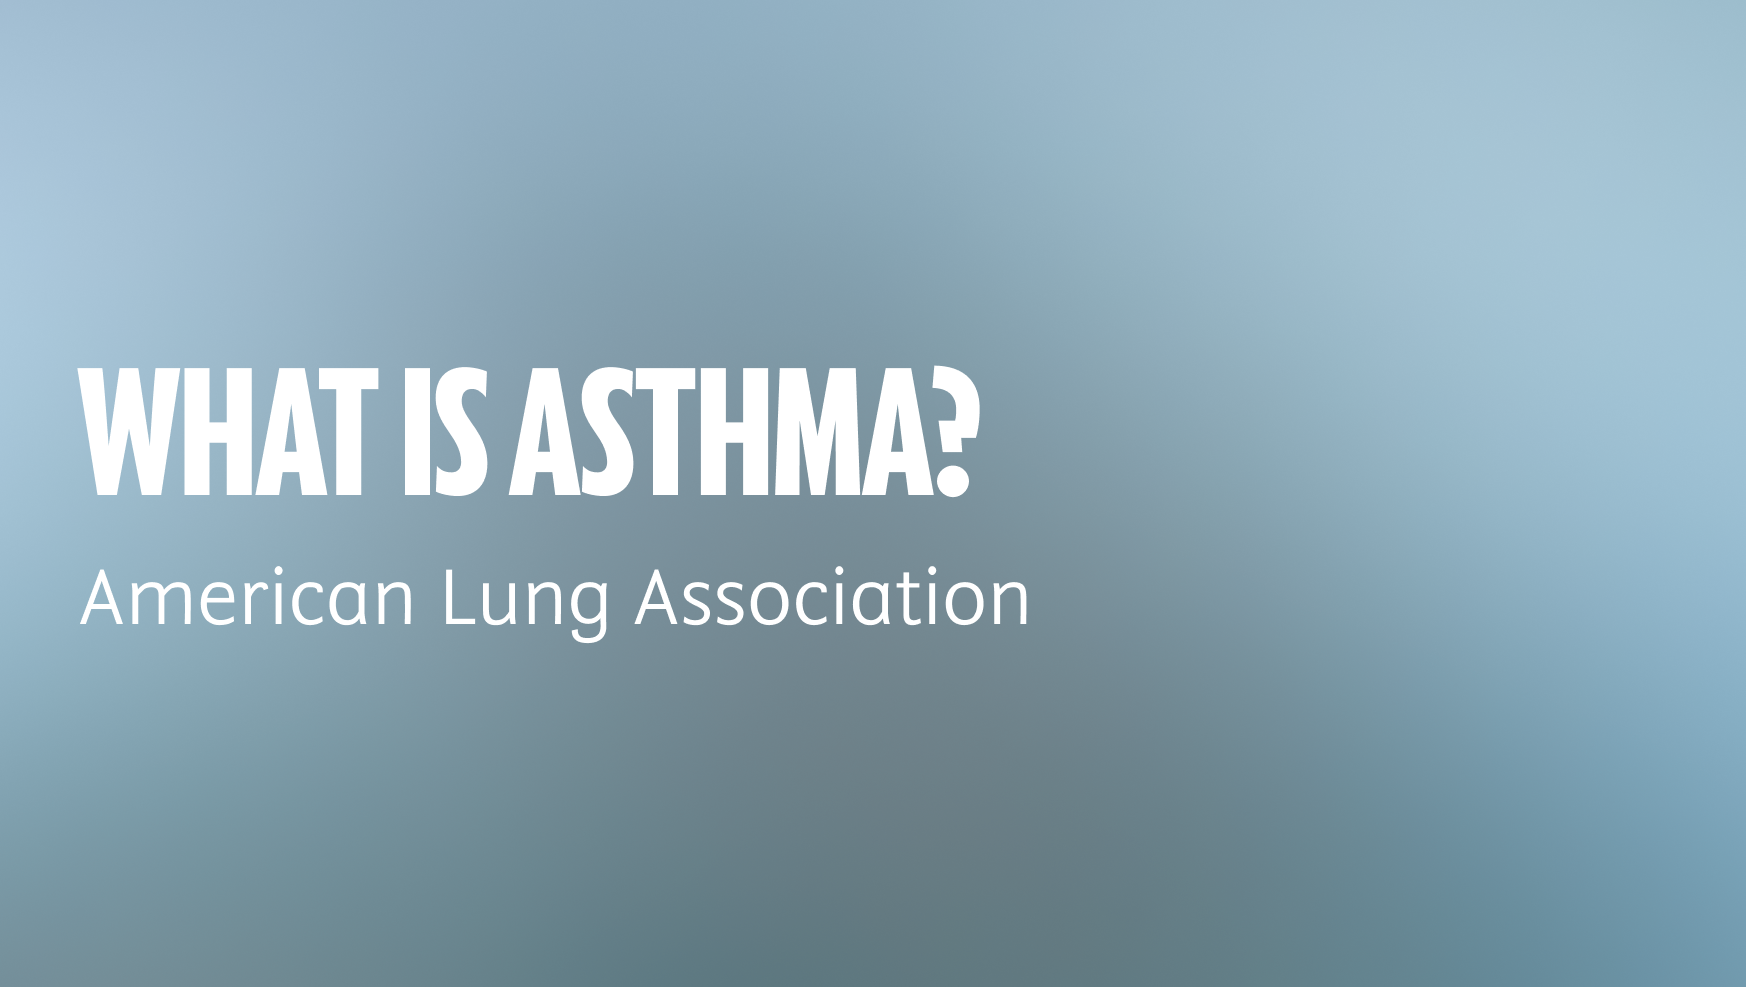 American Lung Association. What is Asthma?